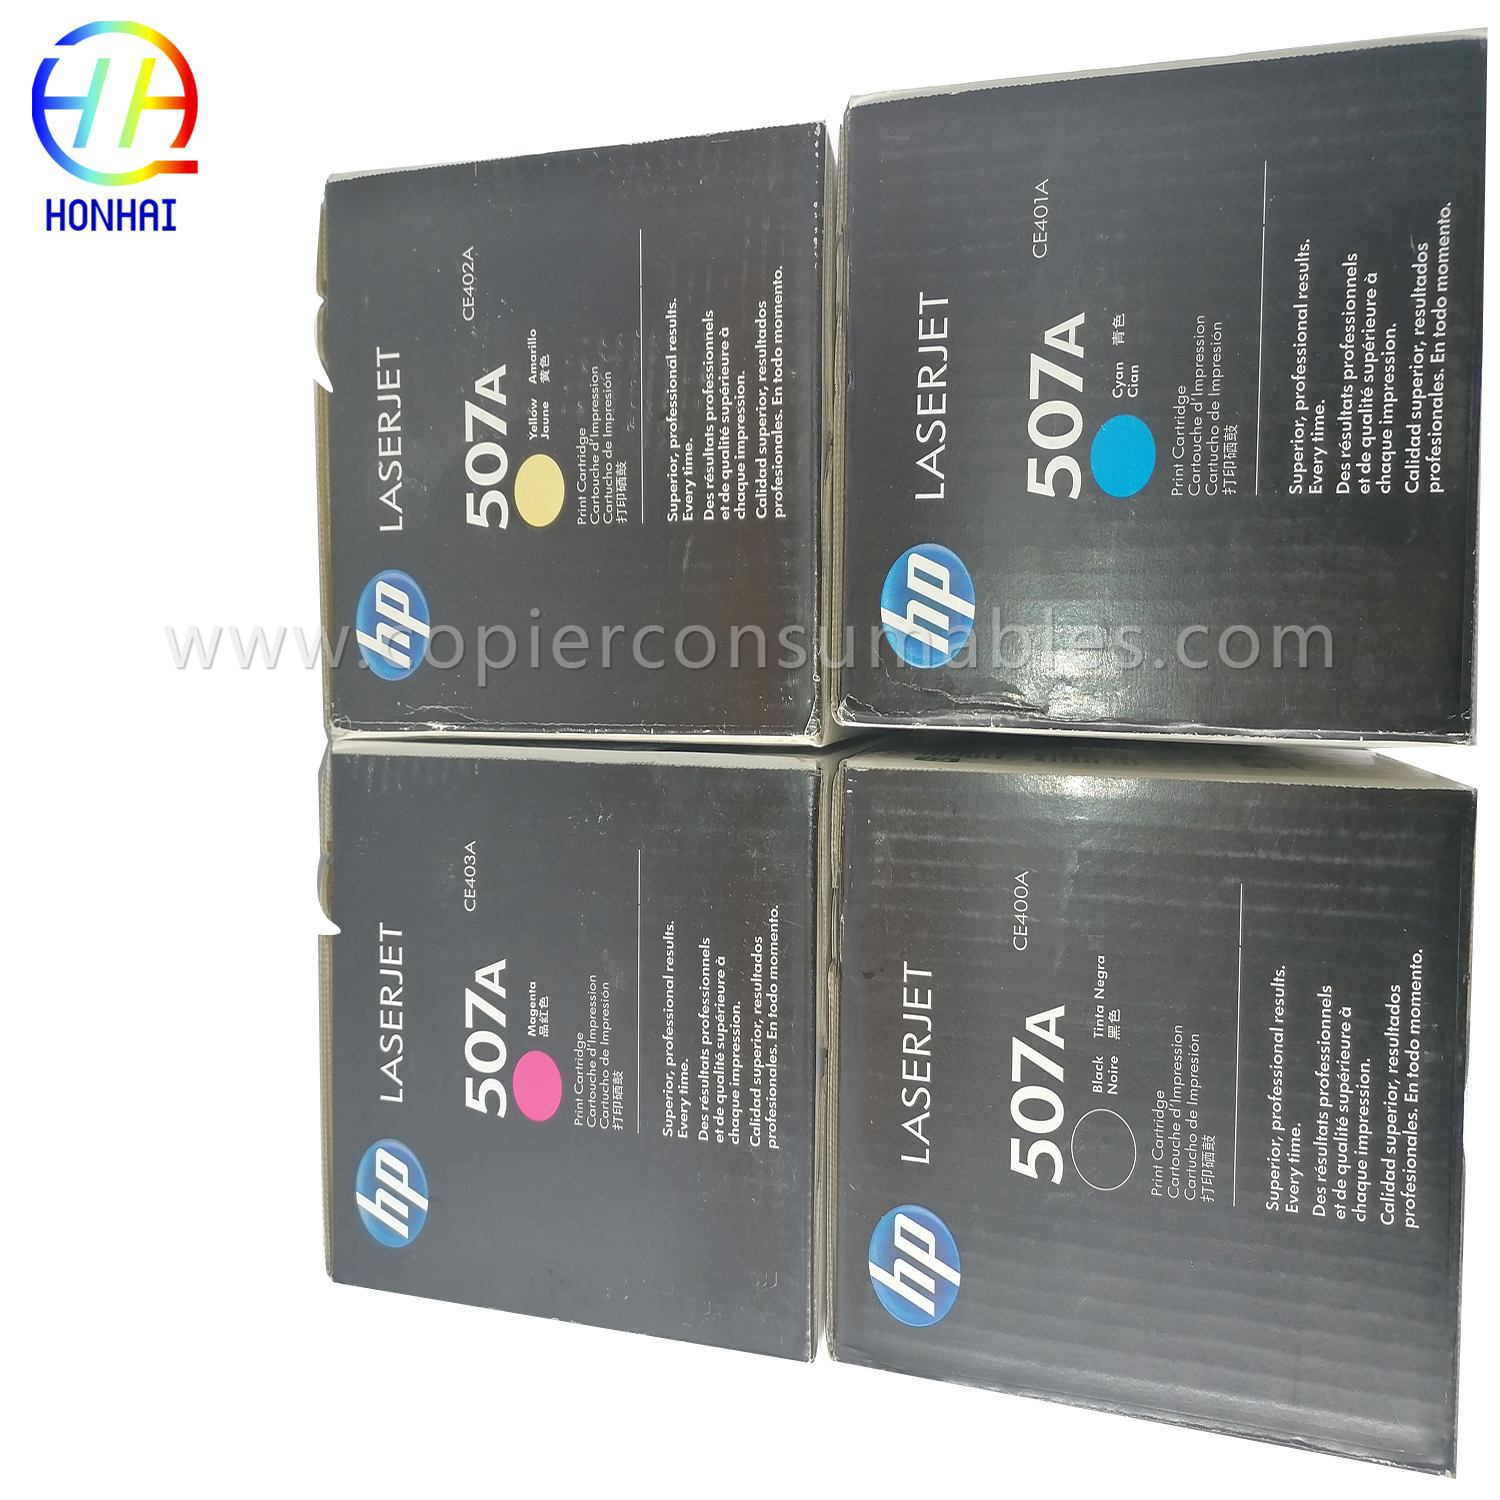 Ink cartridge (set) for HP HP 507A CE400ACE401ACE402ACE403A M575dn,M575f,M575c,M570dn,M570dw,M551dn,M551n,M551xh(2) 拷贝